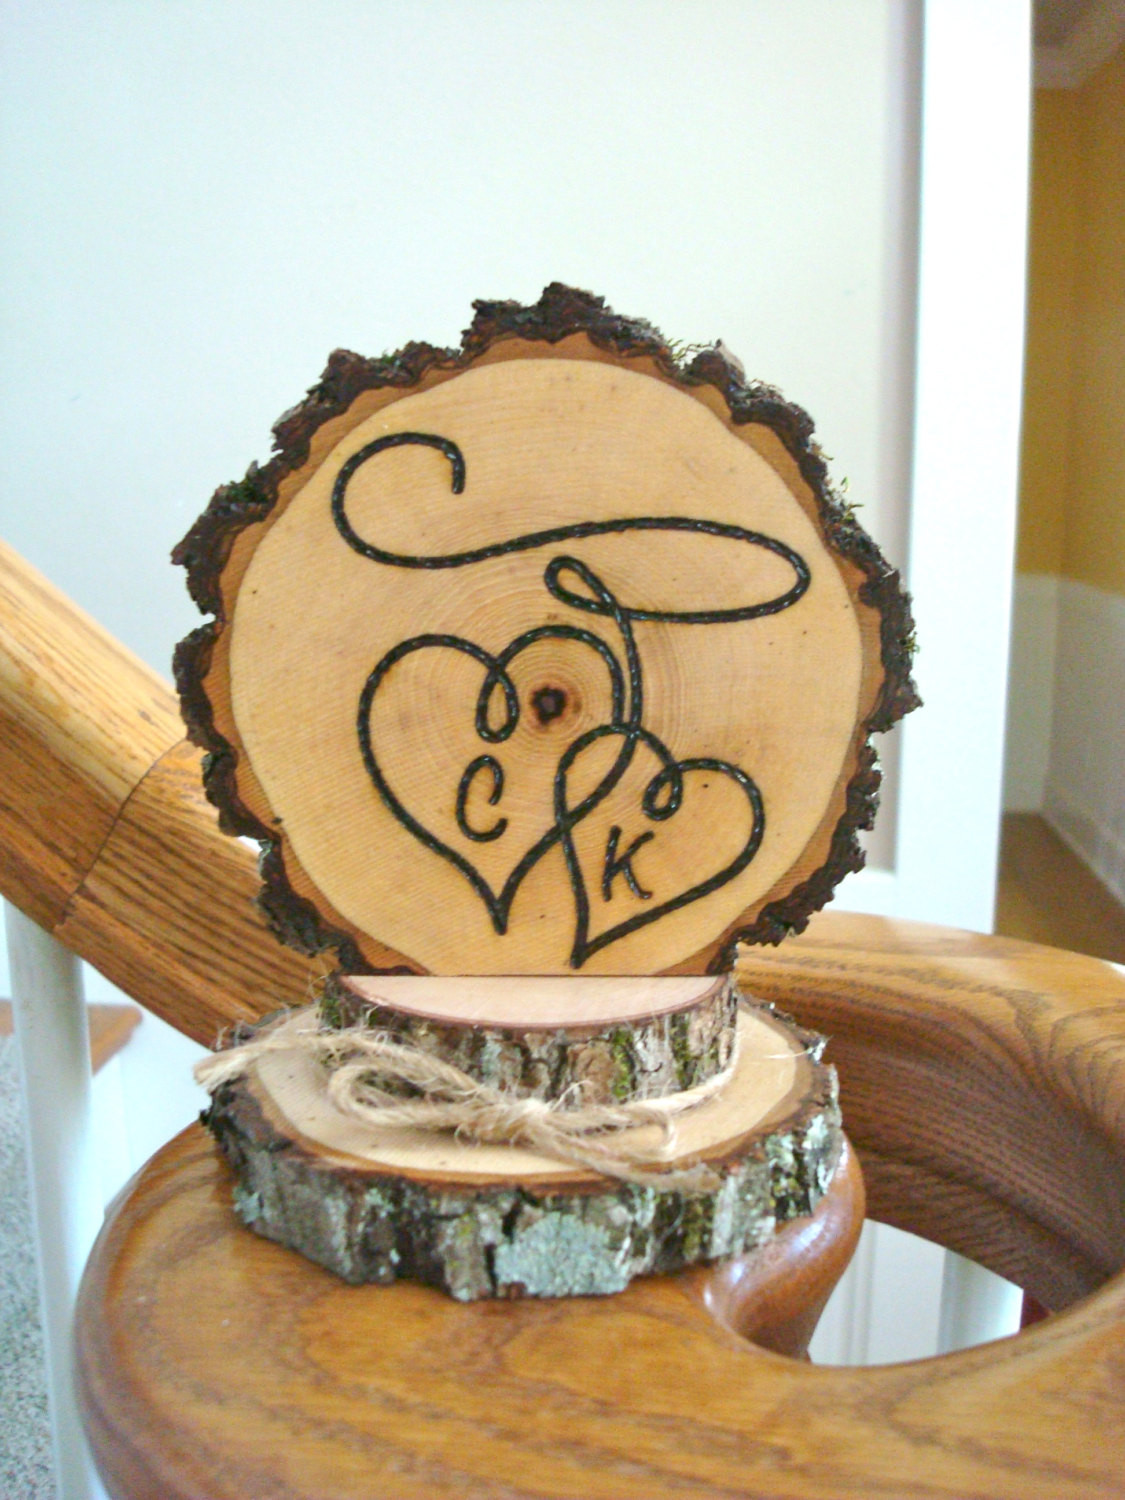 Western Wedding Cake Toppers
 Wedding Cake Topper Rustic Western Heart Lasso Personalized